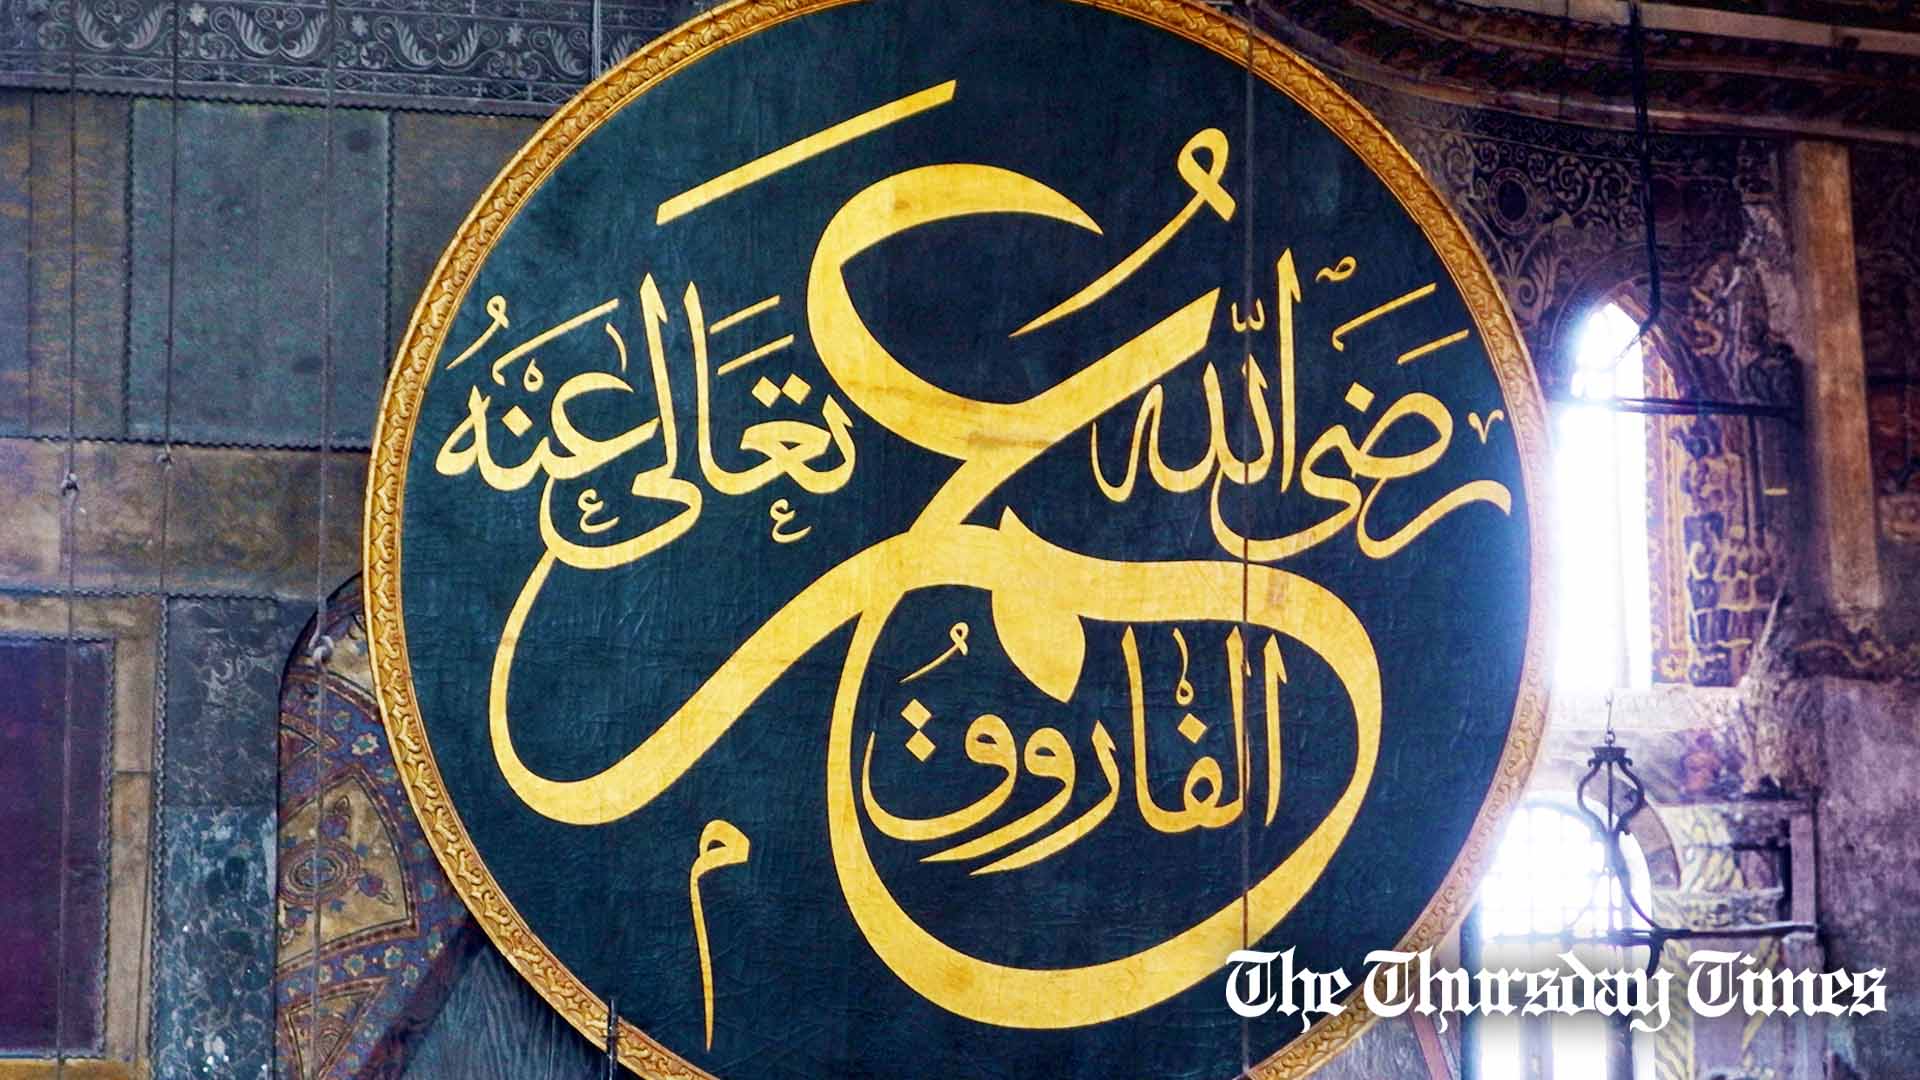 A file photo is shown of a calligraphic seal bearing the name of the Islamic caliph Umar ibn al-Khattab on display at the Hagia Sophia in Istanbul. — FILE/THE THURSDAY TIMES